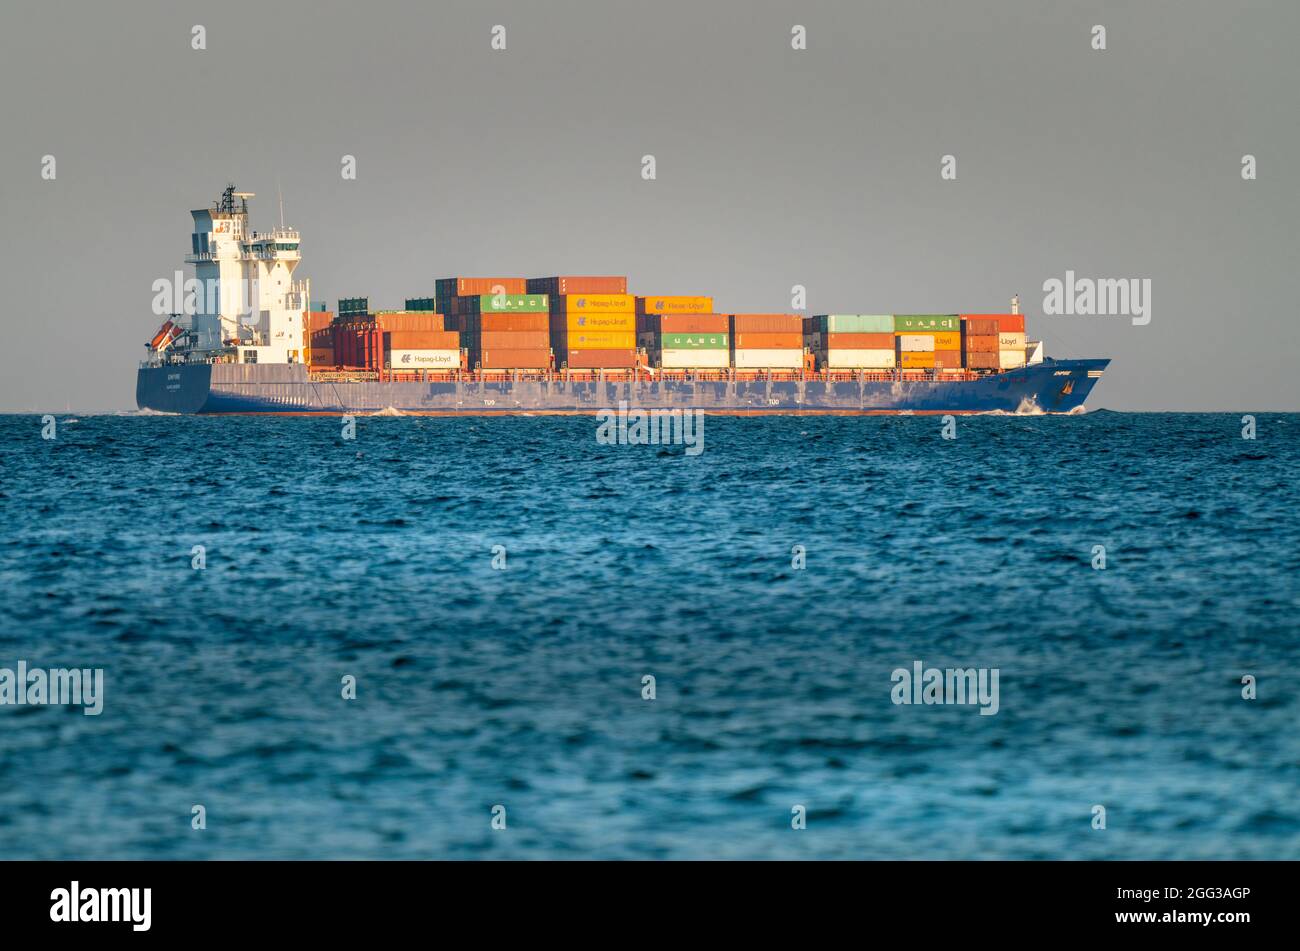 Hek, Poland - 08.01.2021: Big cargo container ship fully loaded on its way  across the Baltic sea in early morning light. Sea tranportation vessel  Stock Photo - Alamy